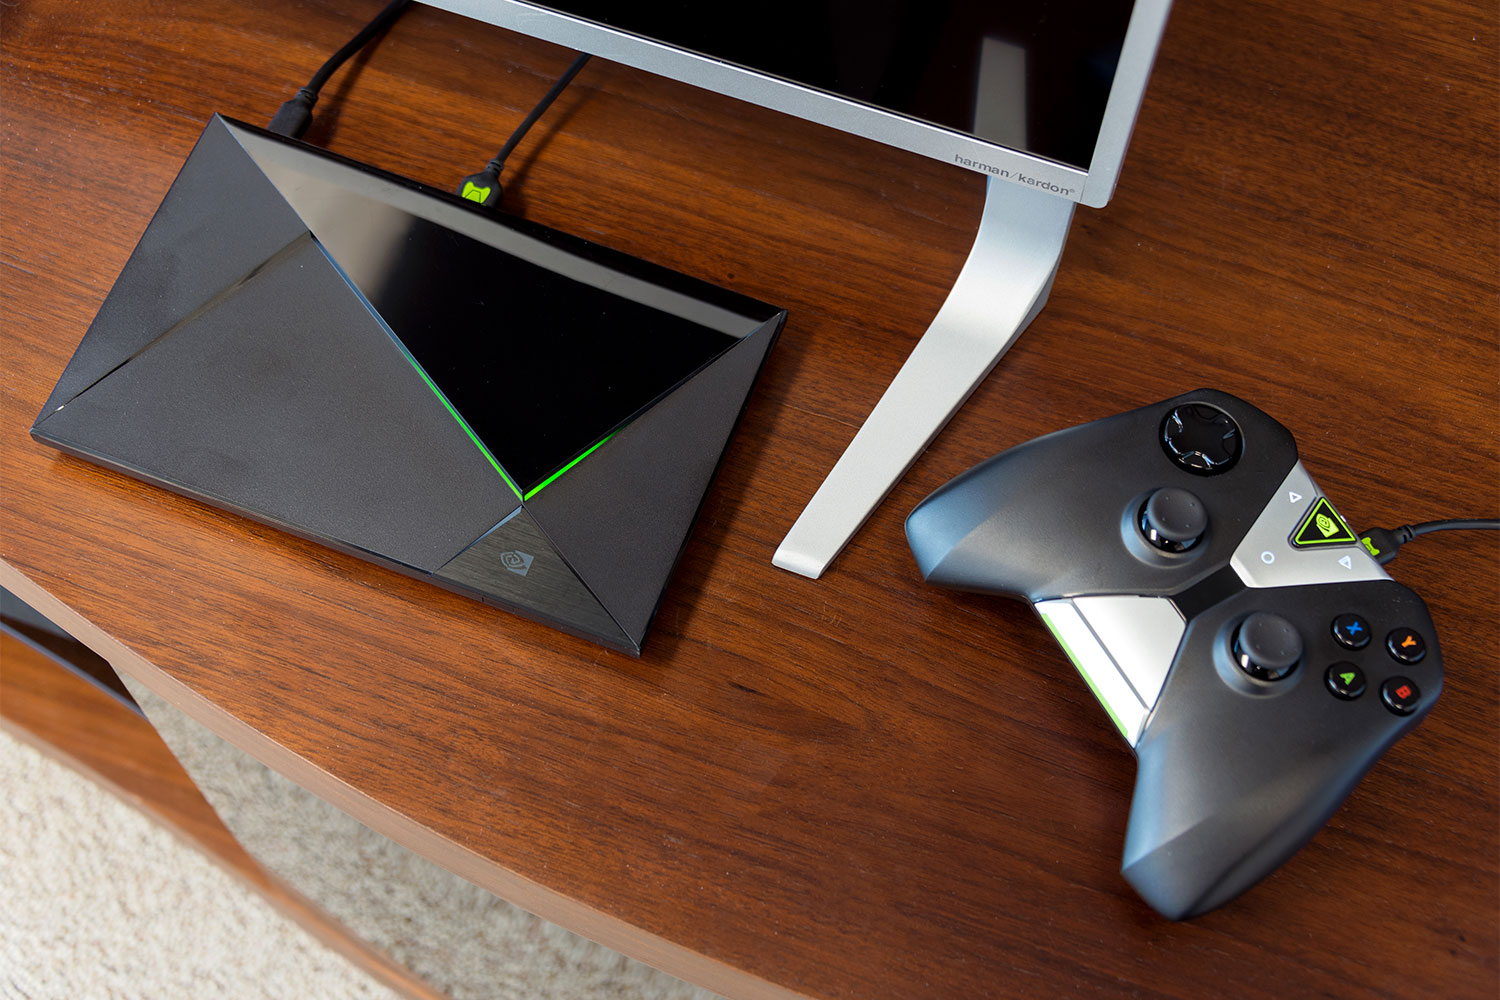 Nvidia kills off GameStream on Shield, points users to Steam